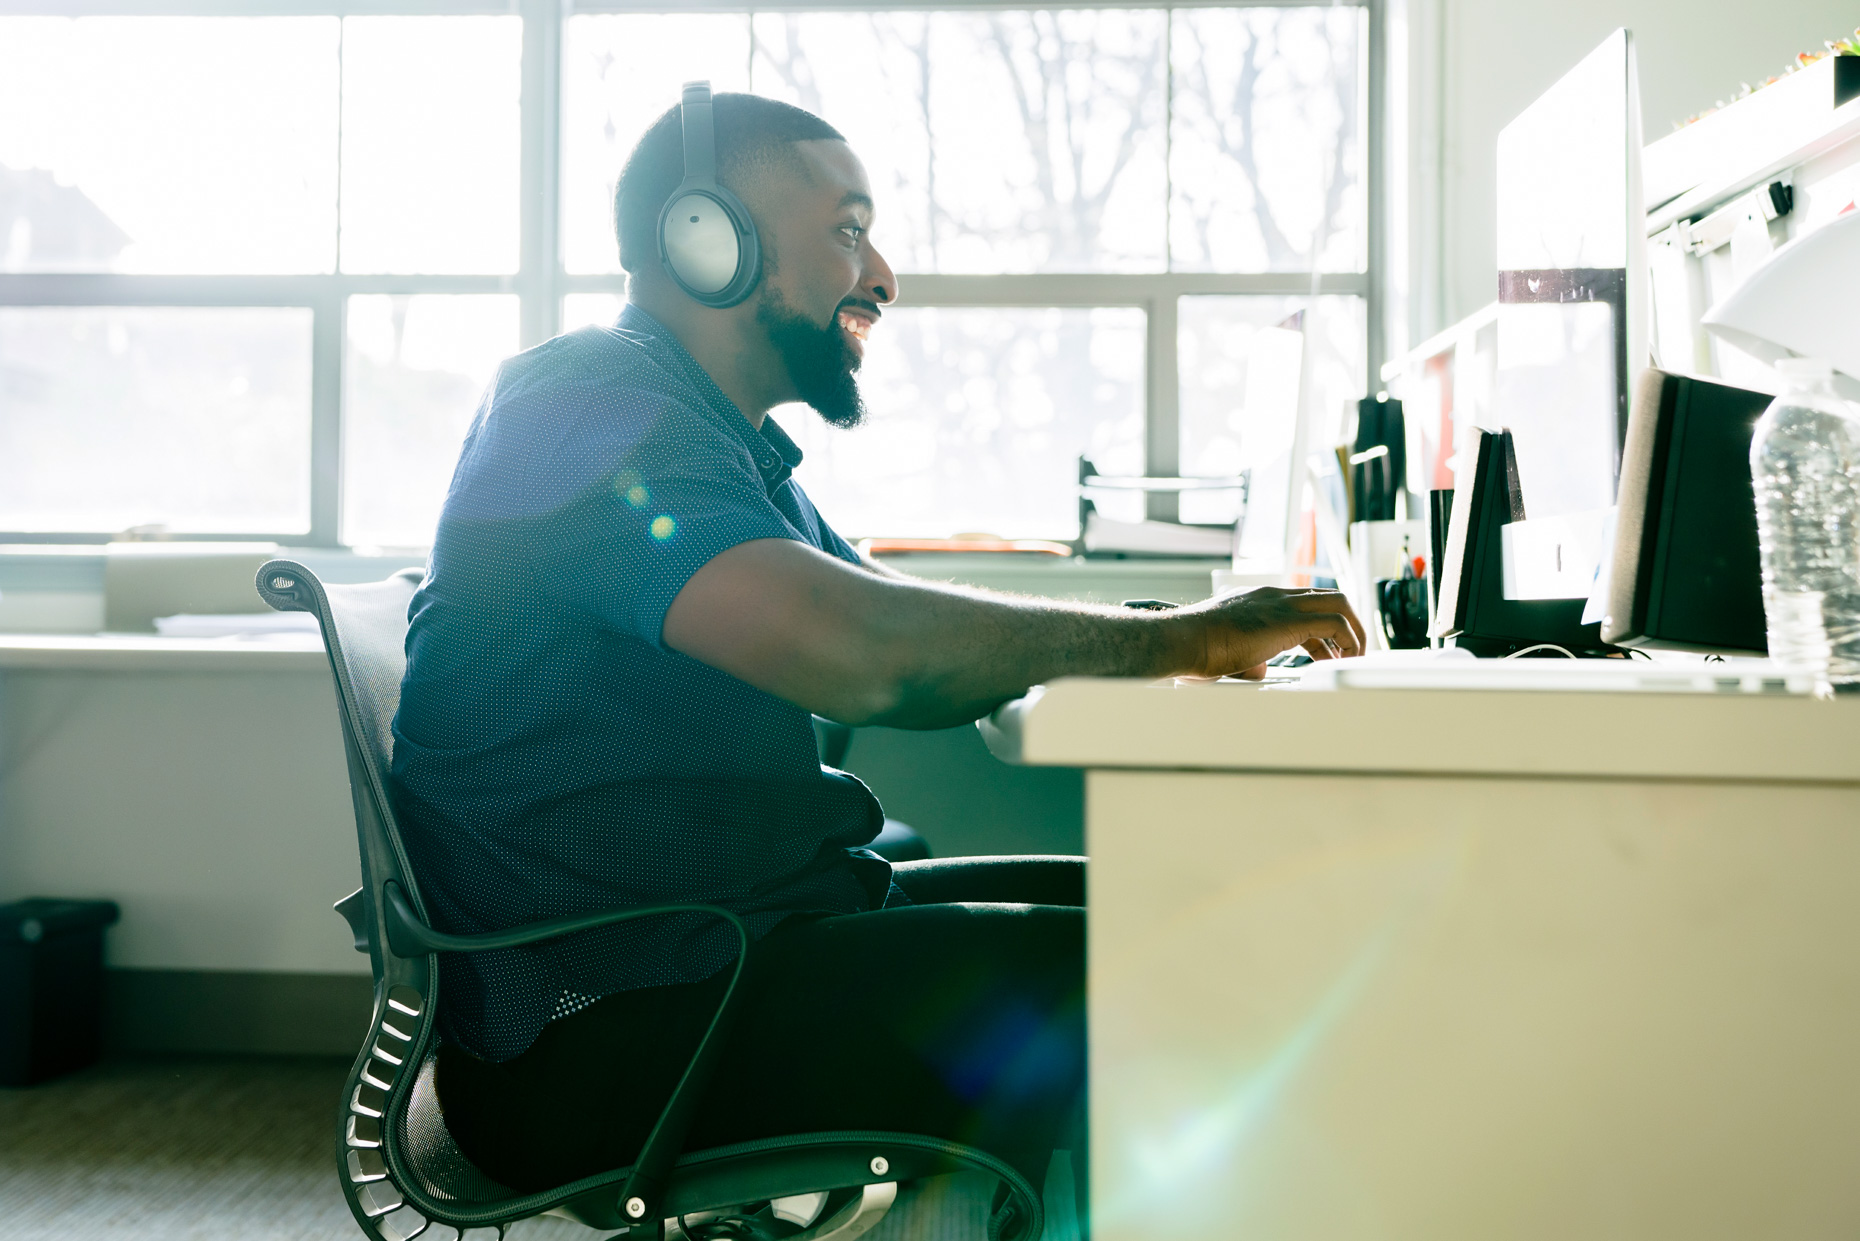 Black man with wireless headphones working in office on computer